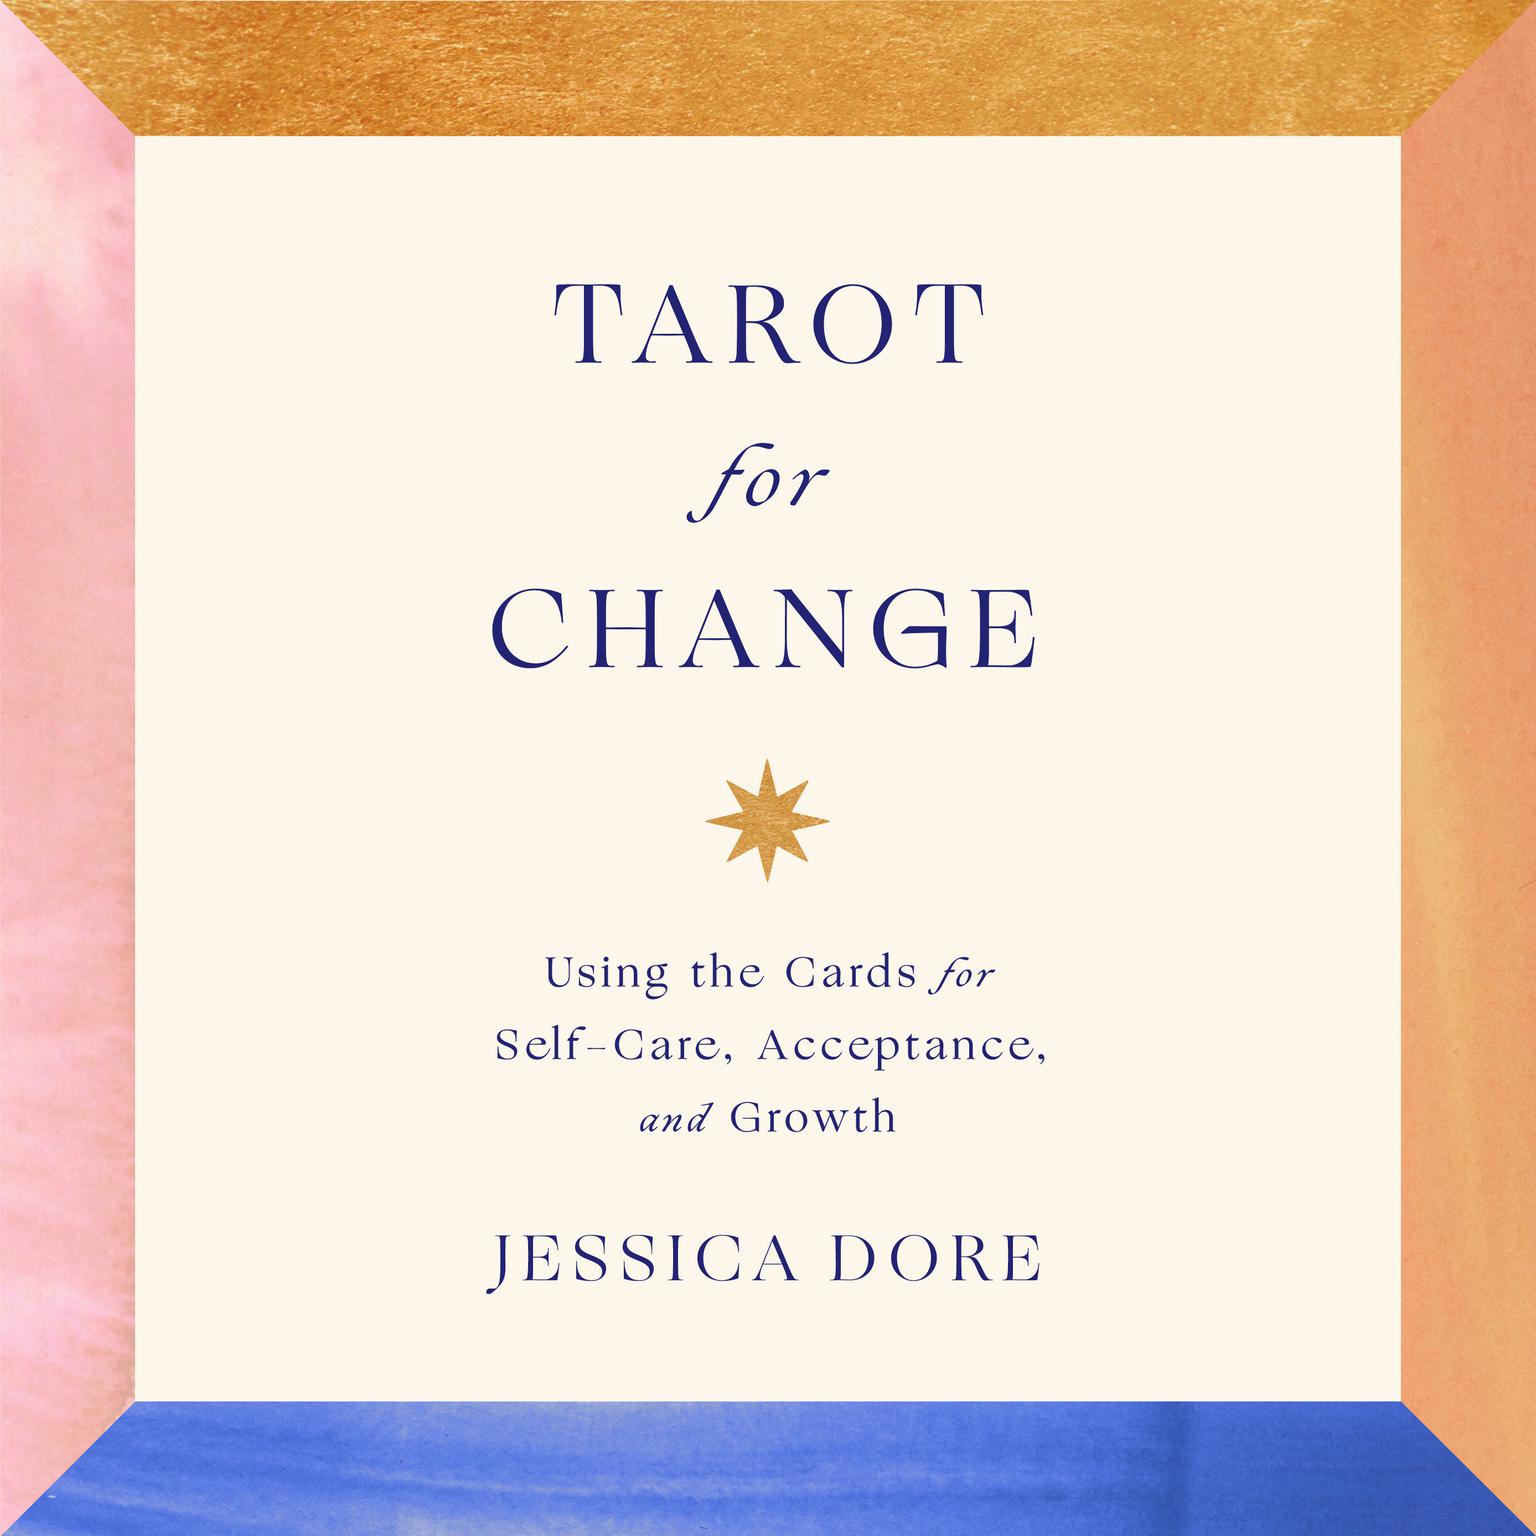 Tarot for Change: Using the Cards for Self-Care, Acceptance, and Growth Audiobook, by Jessica Dore